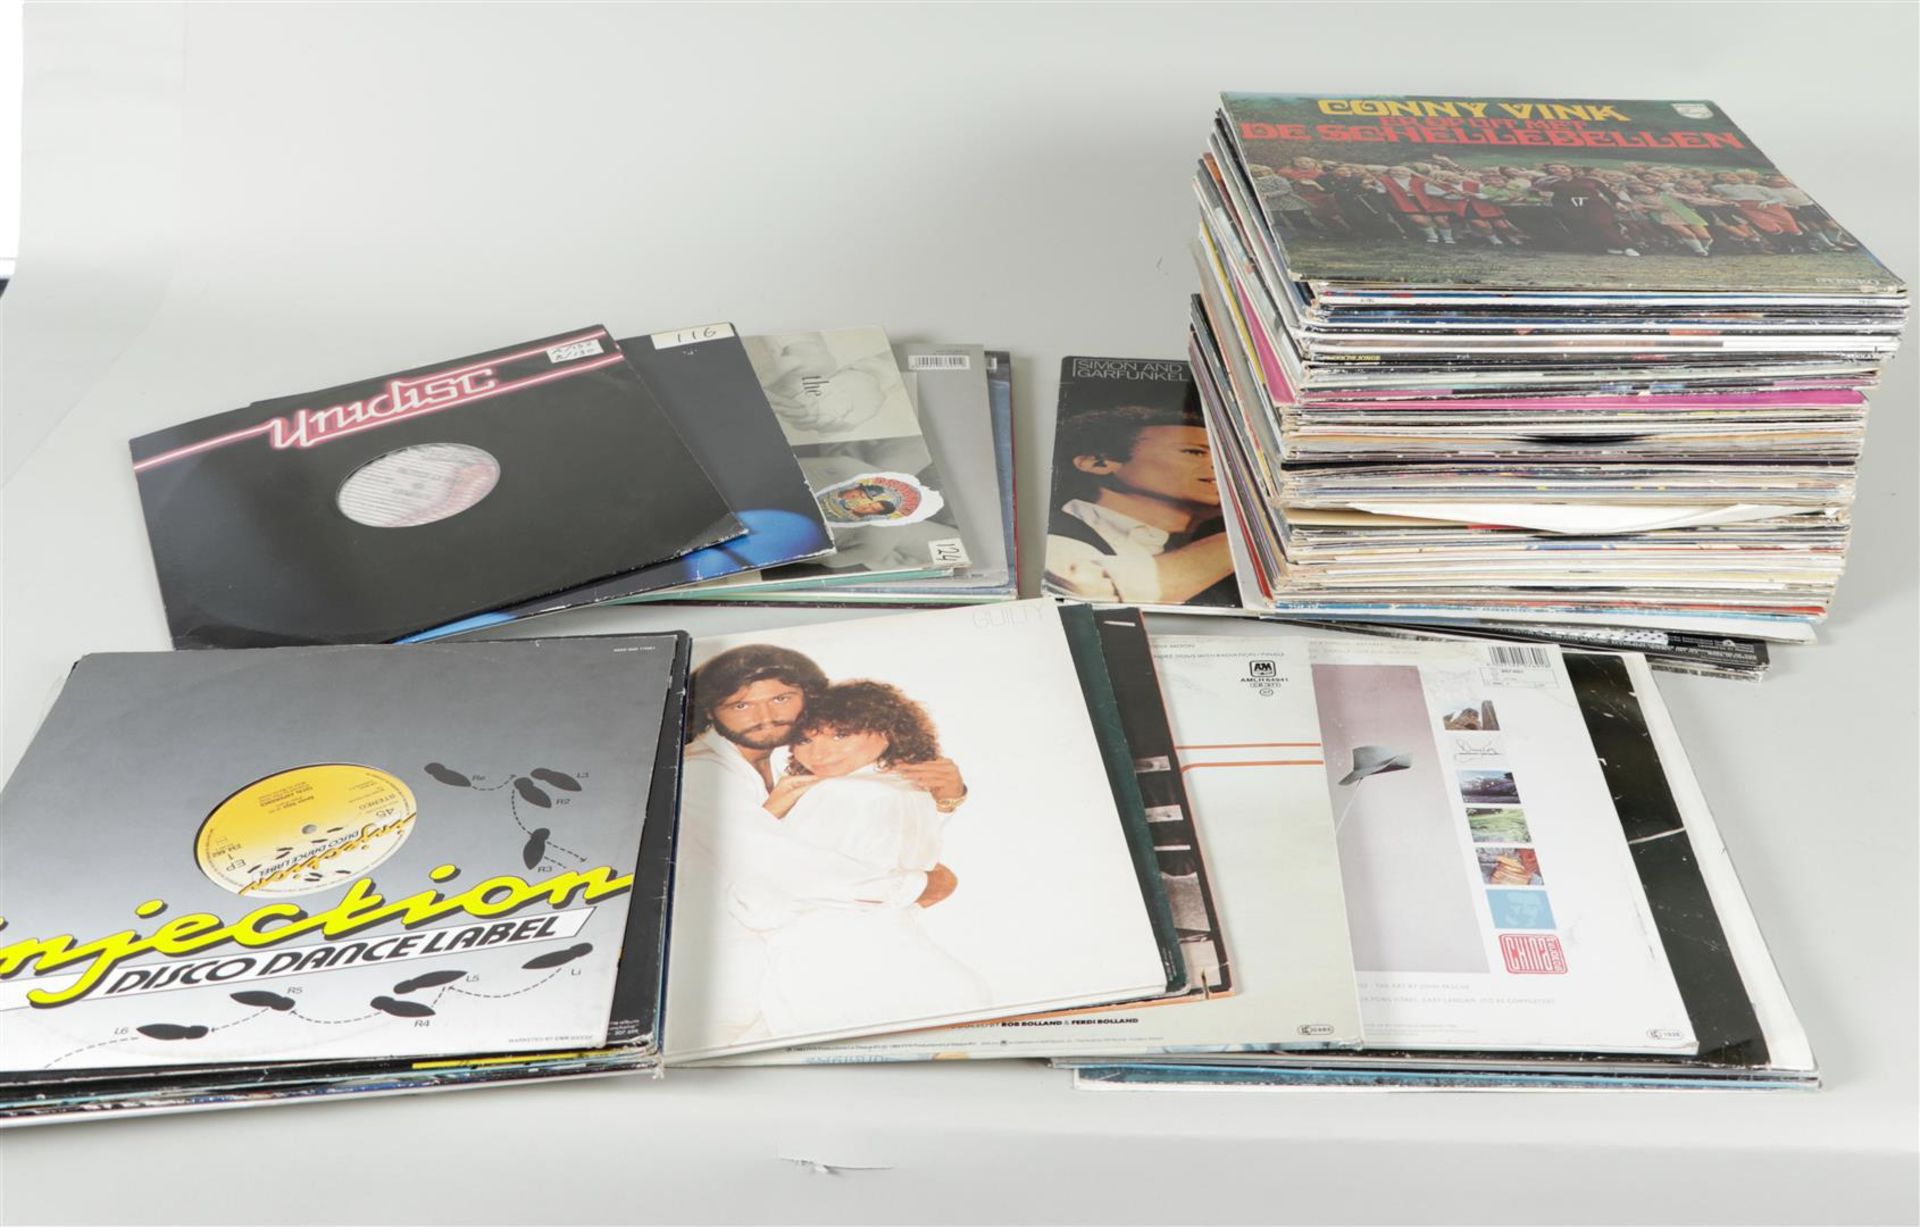 A lot of various LPs, mainly 80's.